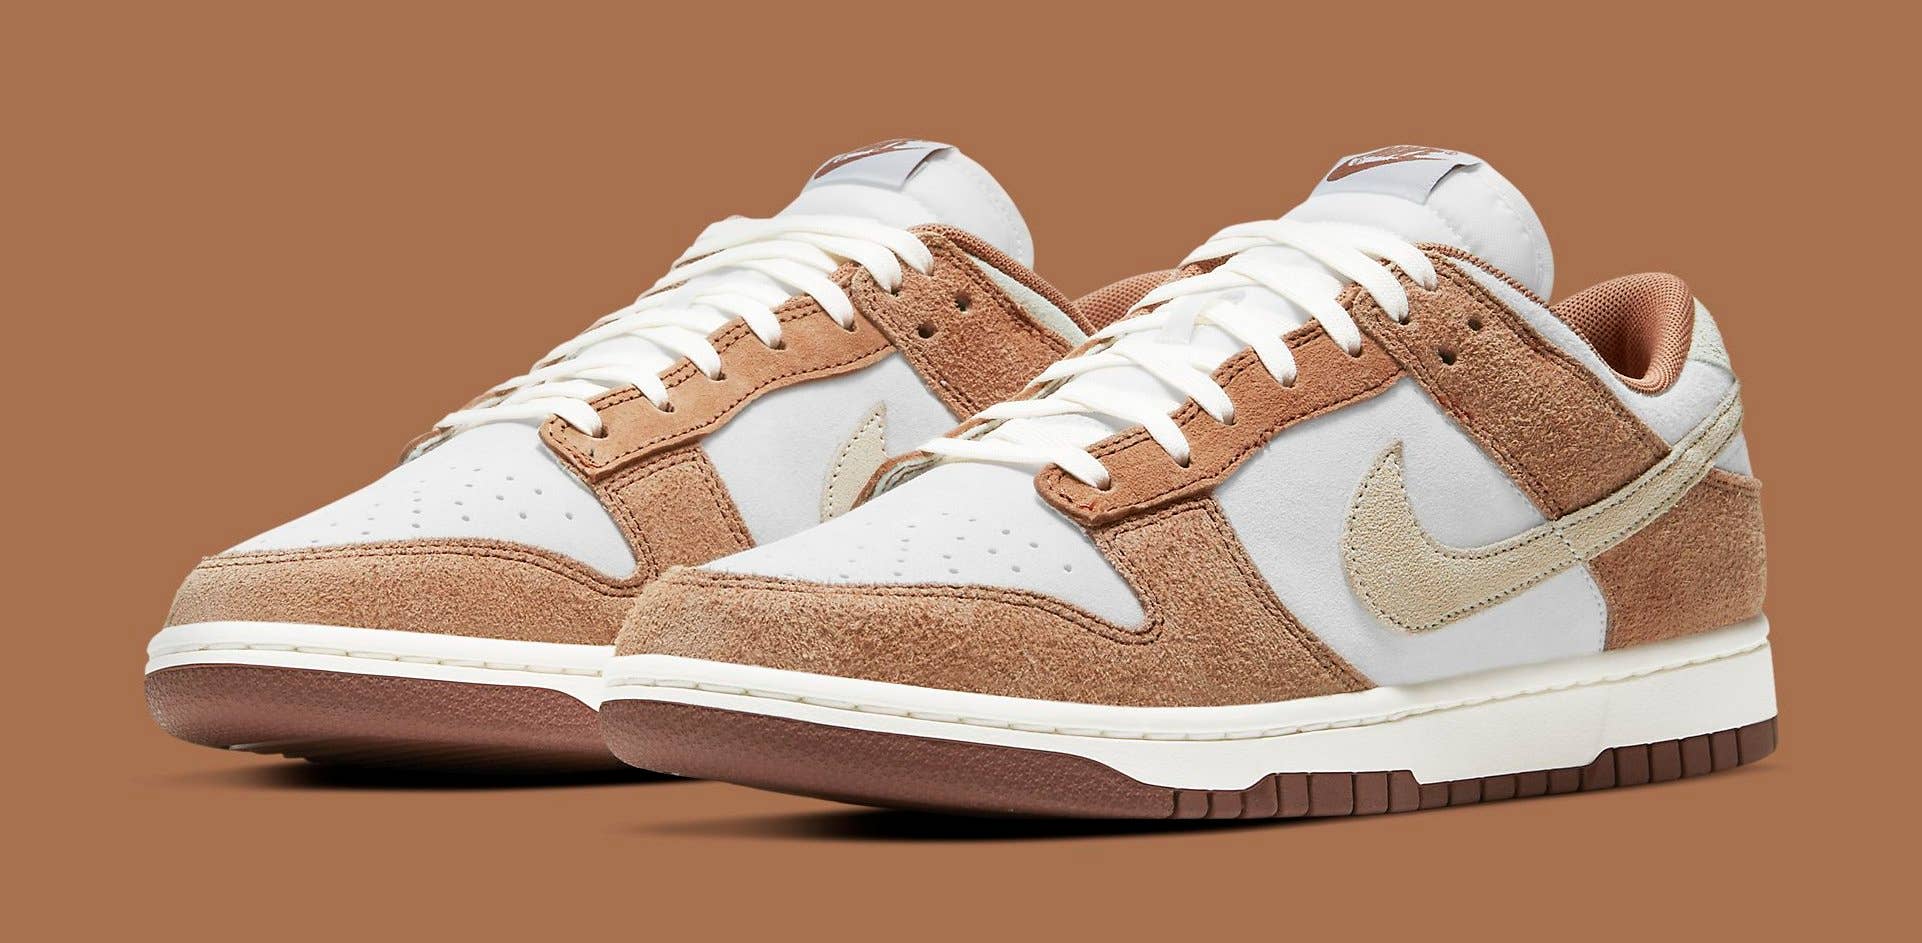 Medium Curry' Nike Dunk Lows Are Releasing This Month